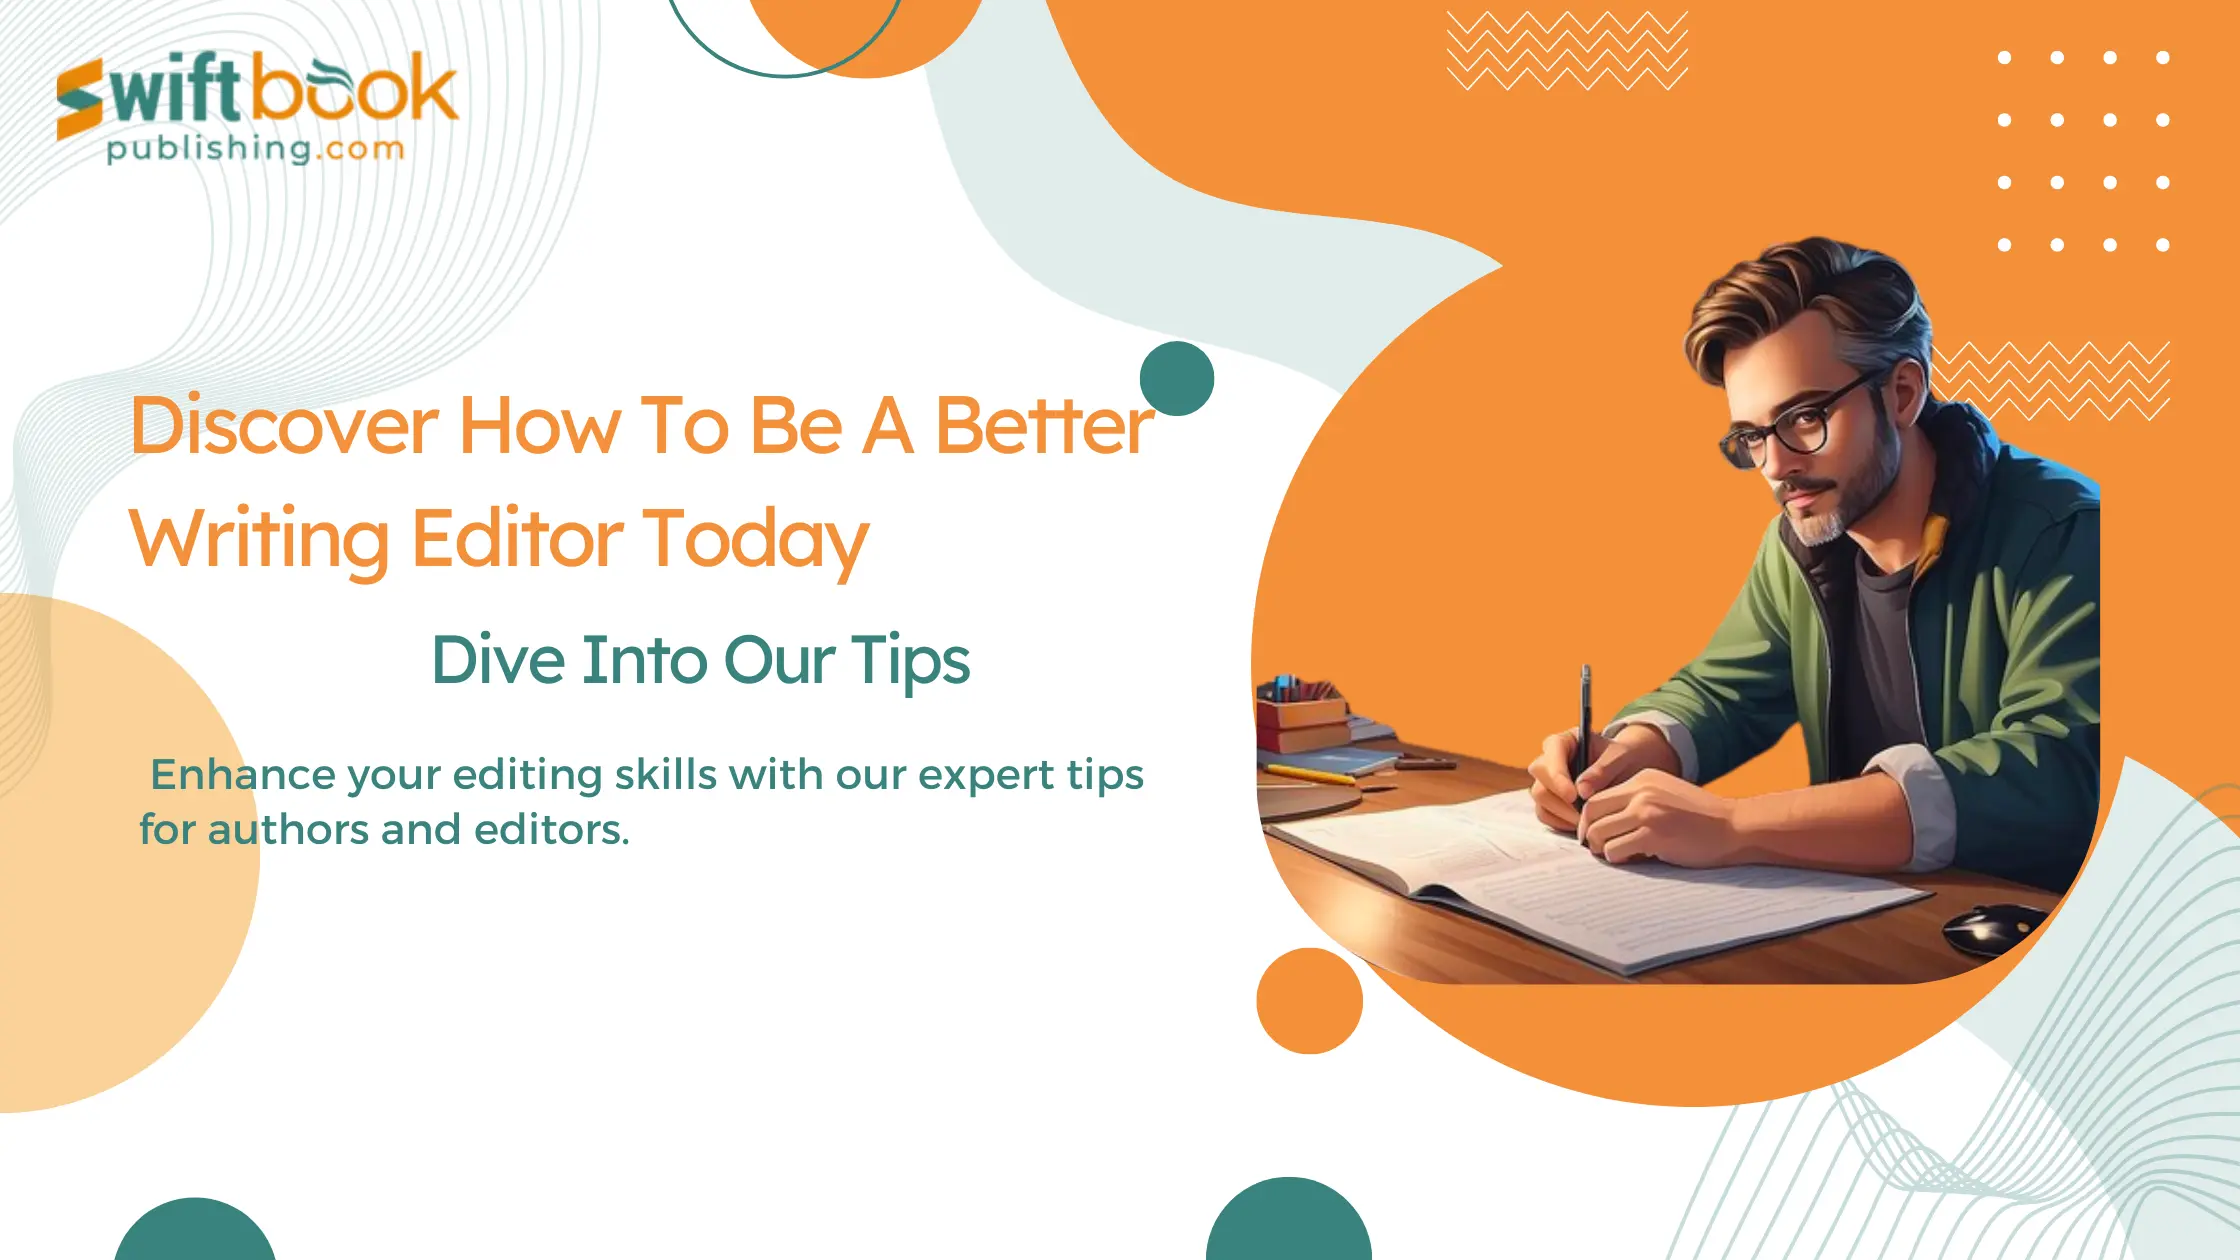 Looking For How To Be A Better Writing Editor? Dive Into Our Tips Now!